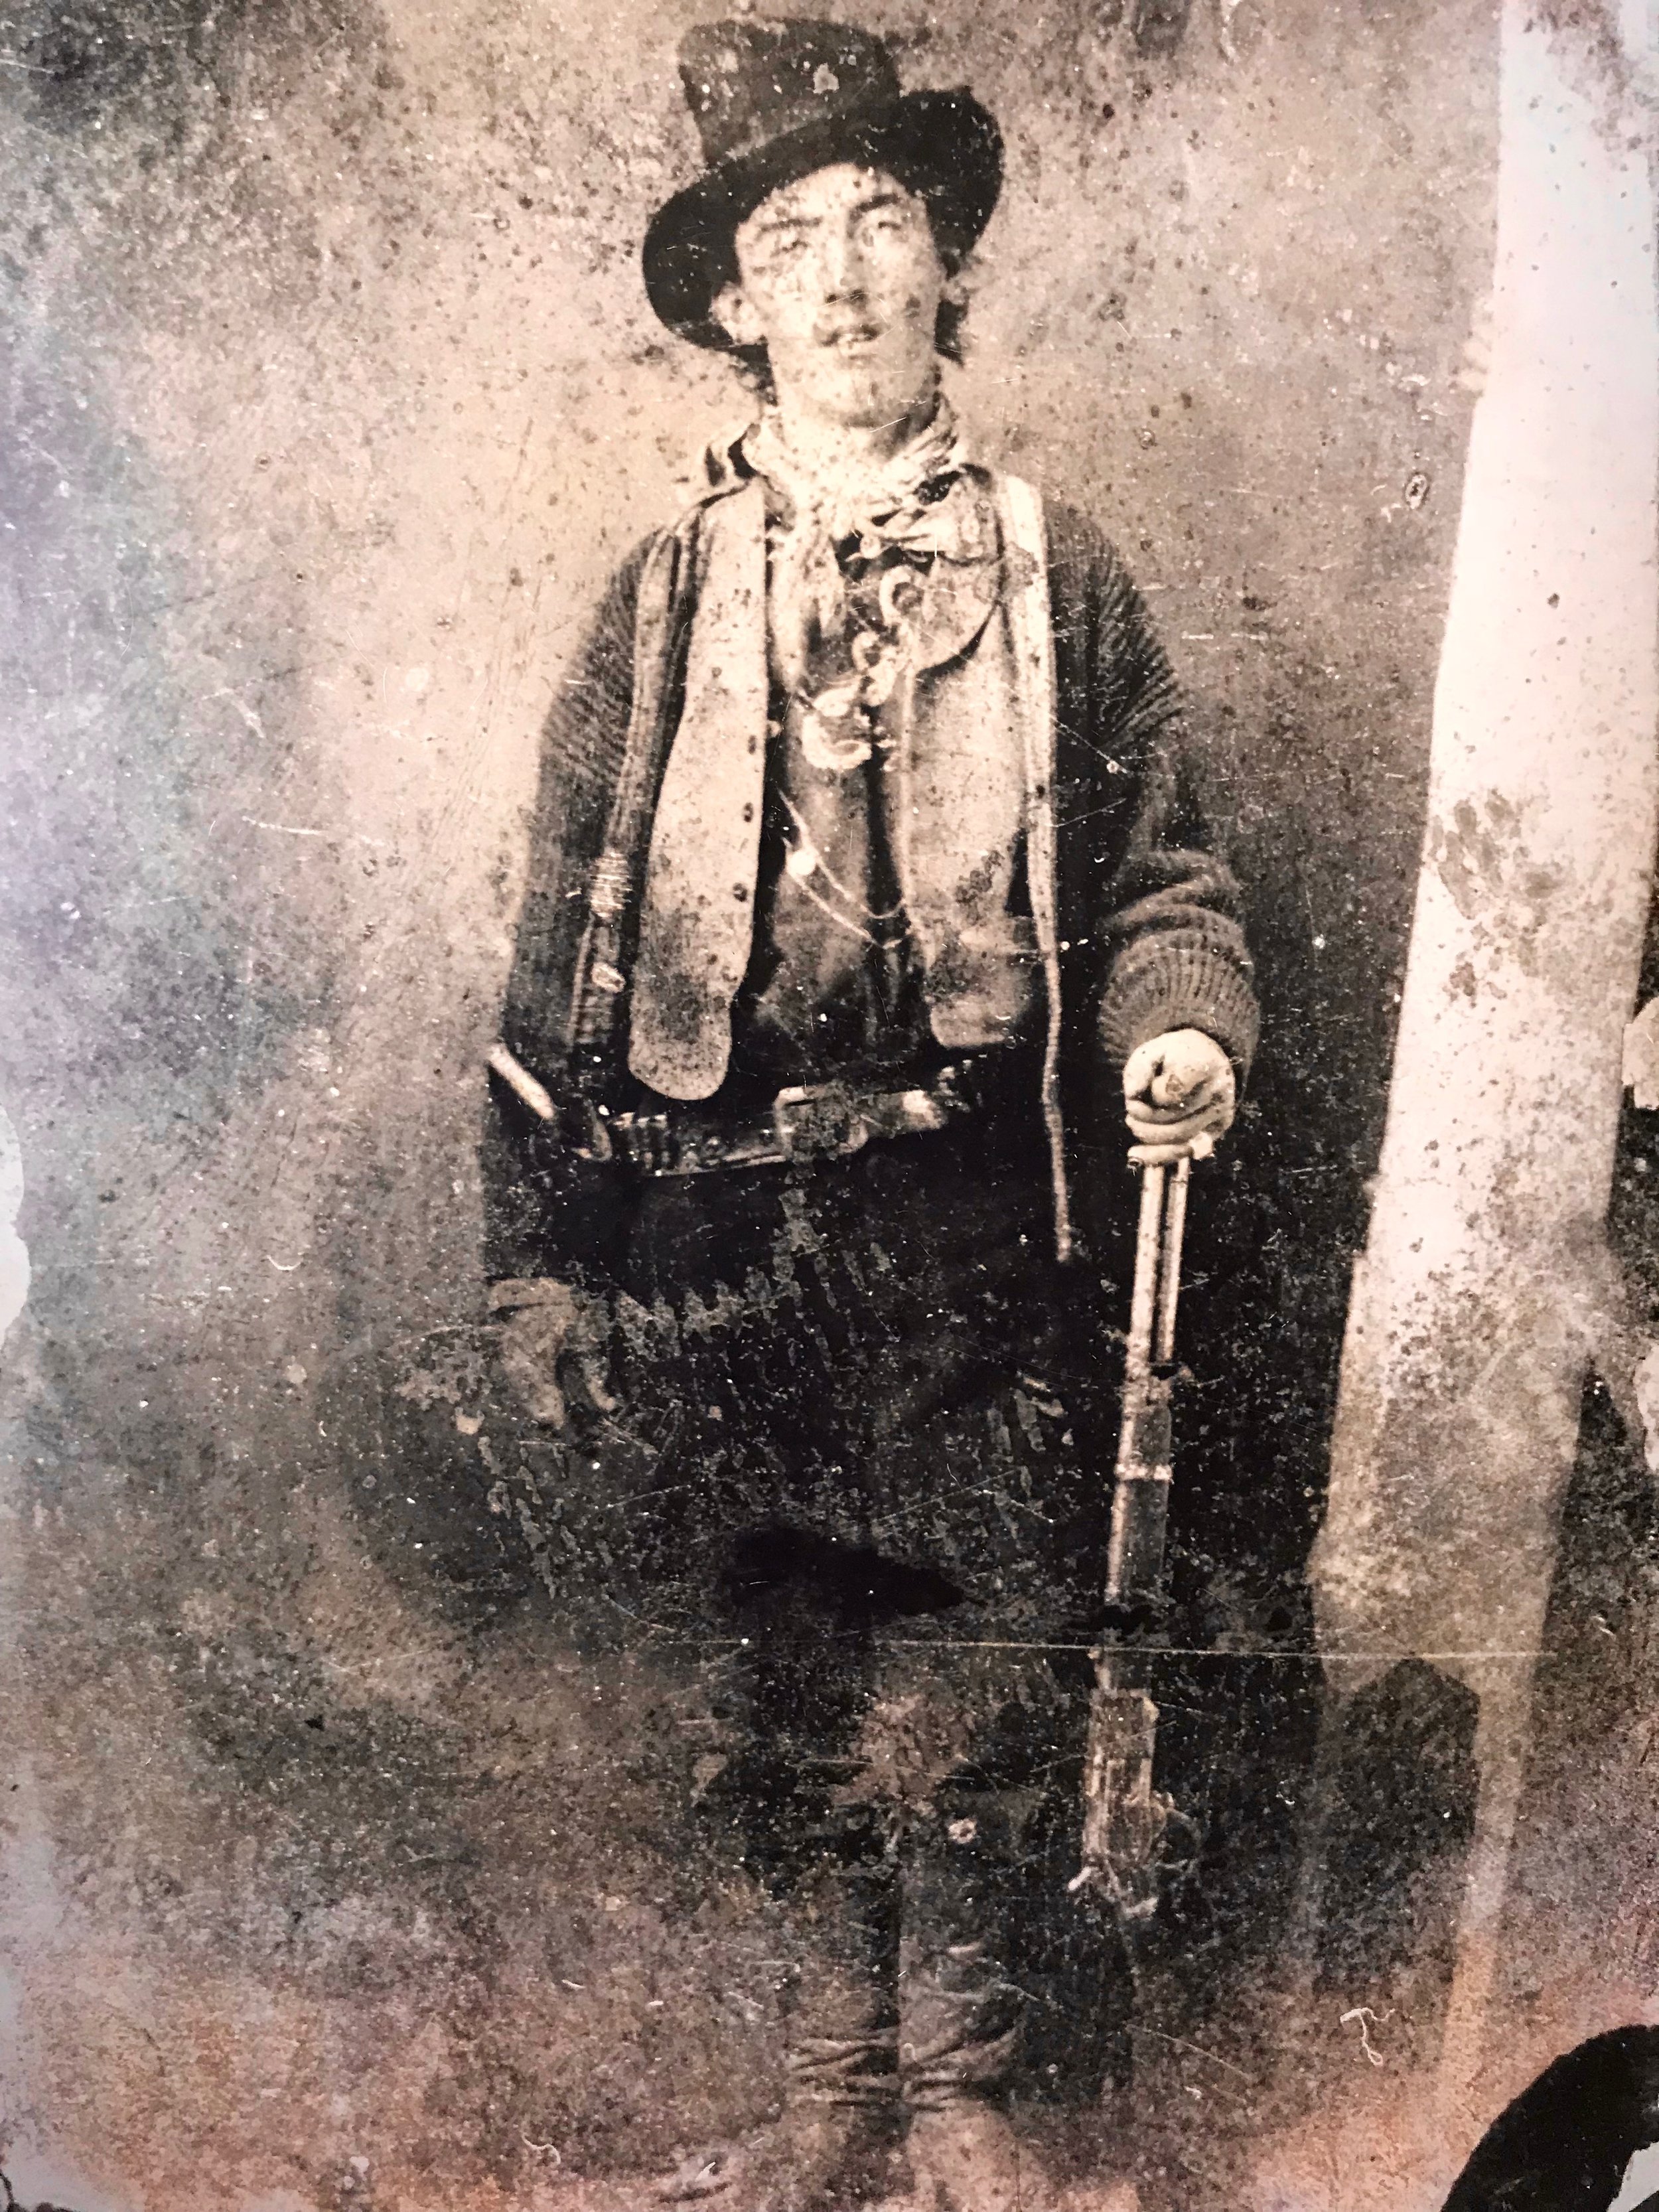  Billy the Kid in the 1870s, in the only known photo of him. 